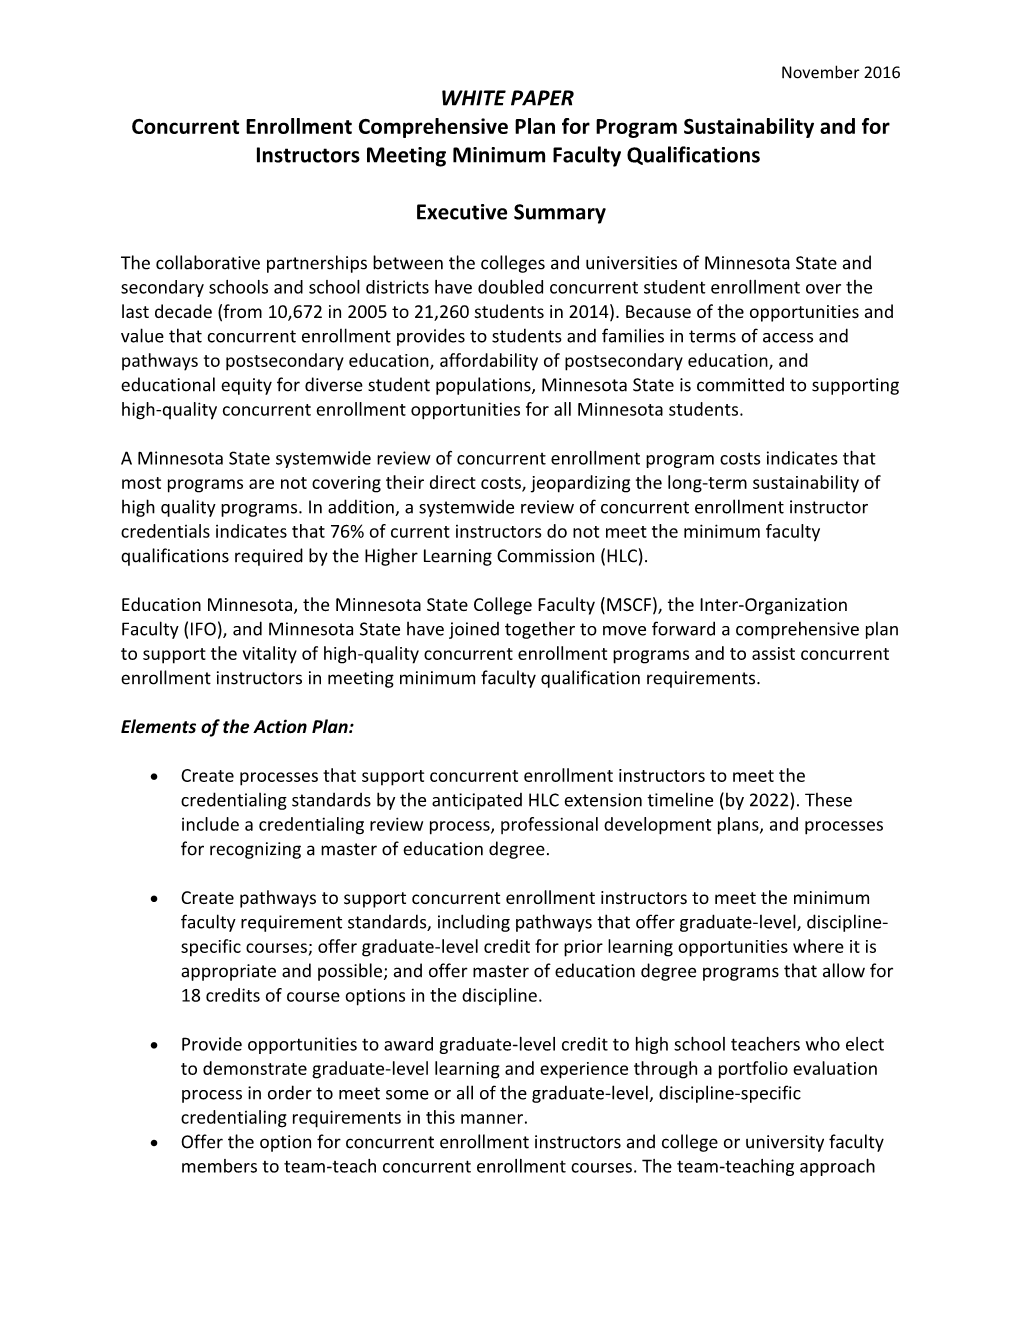 Concurrent Enrollment Comprehensive Plan for Program Sustainability and for Instructors